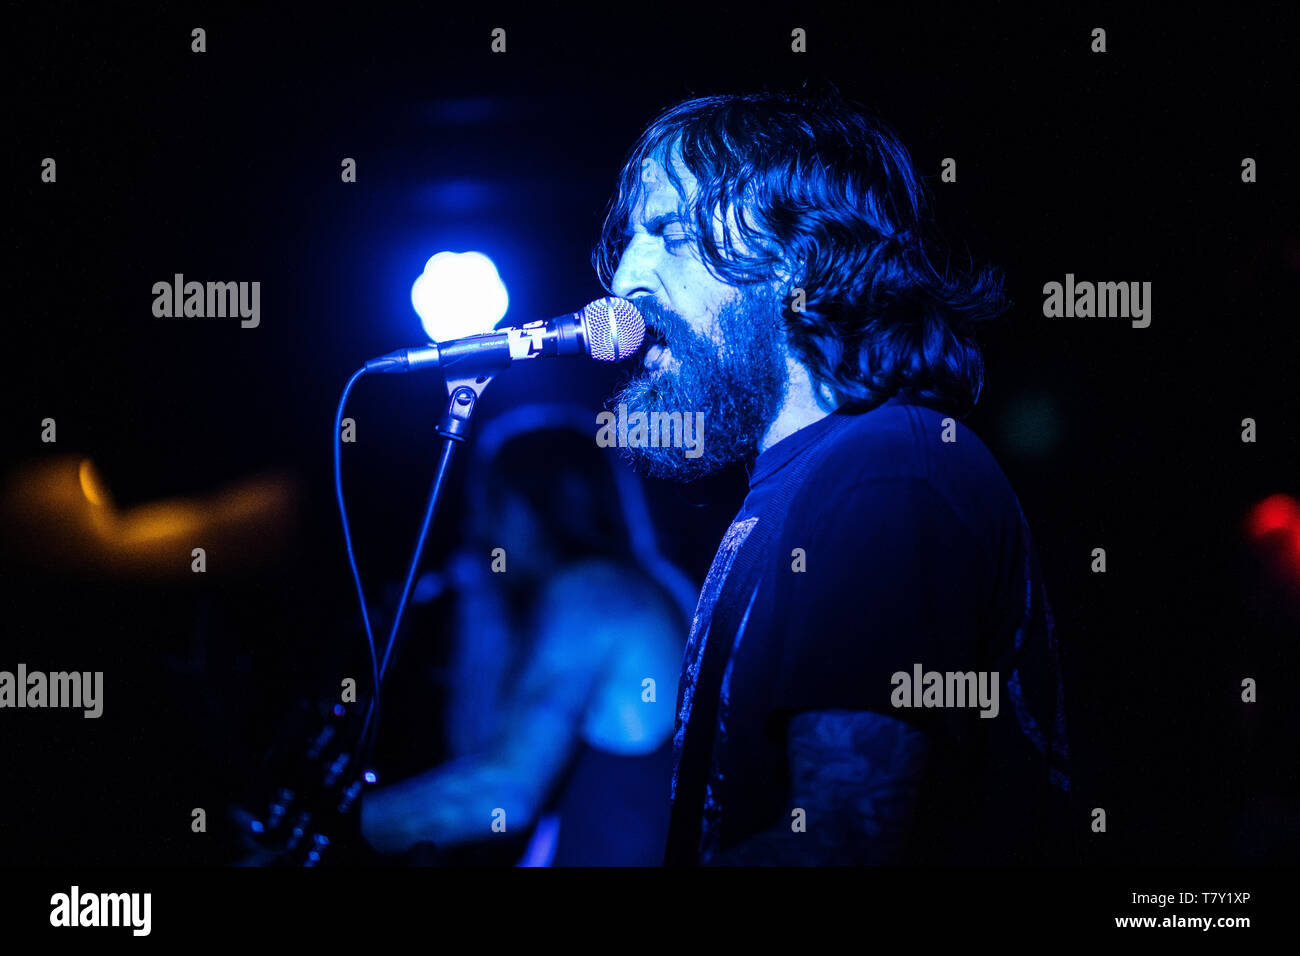 Denmark, Copenhagen - May 7, 2019. The American sludge metal band Black Tusk performs a live concert at Loppen in Copenhagen. (Photo credit: Gonzales Photo - Peter Troest). Stock Photo